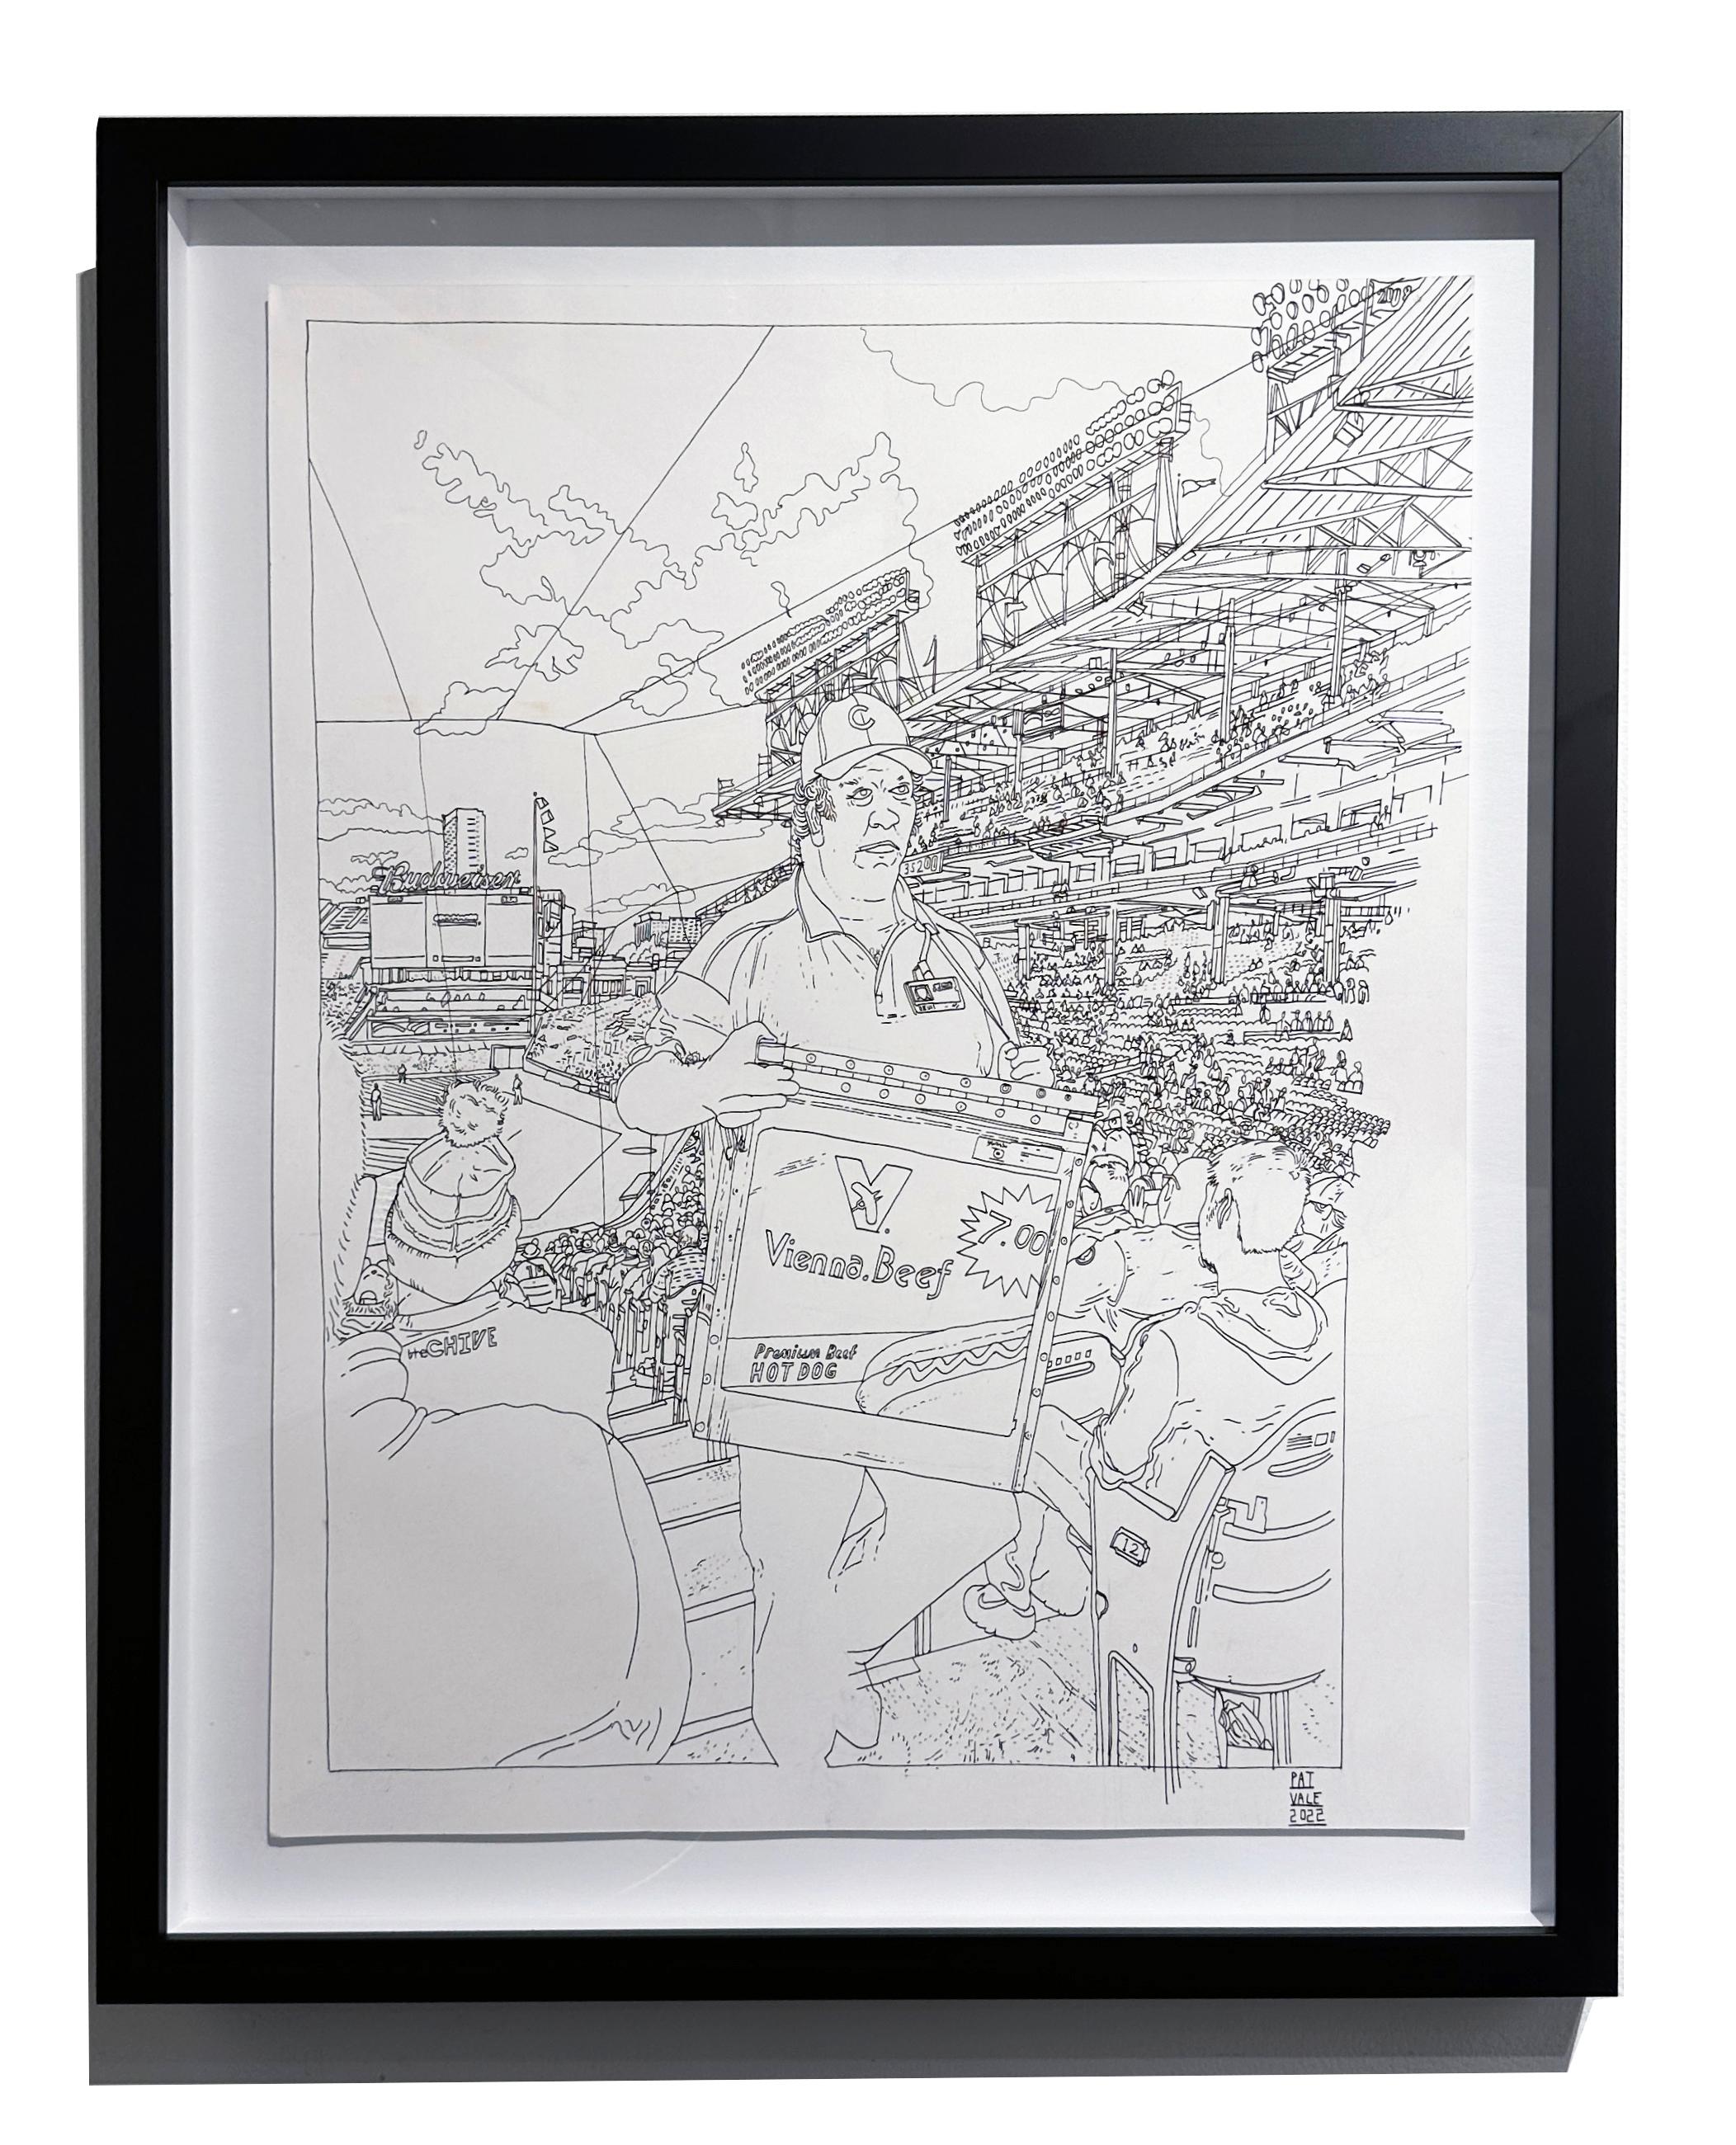 Vienna Beef Guy - Chicago's Wrigley Field Hot Dog Vendor, Ink on Paper, Framed - Painting by Patrick Vale